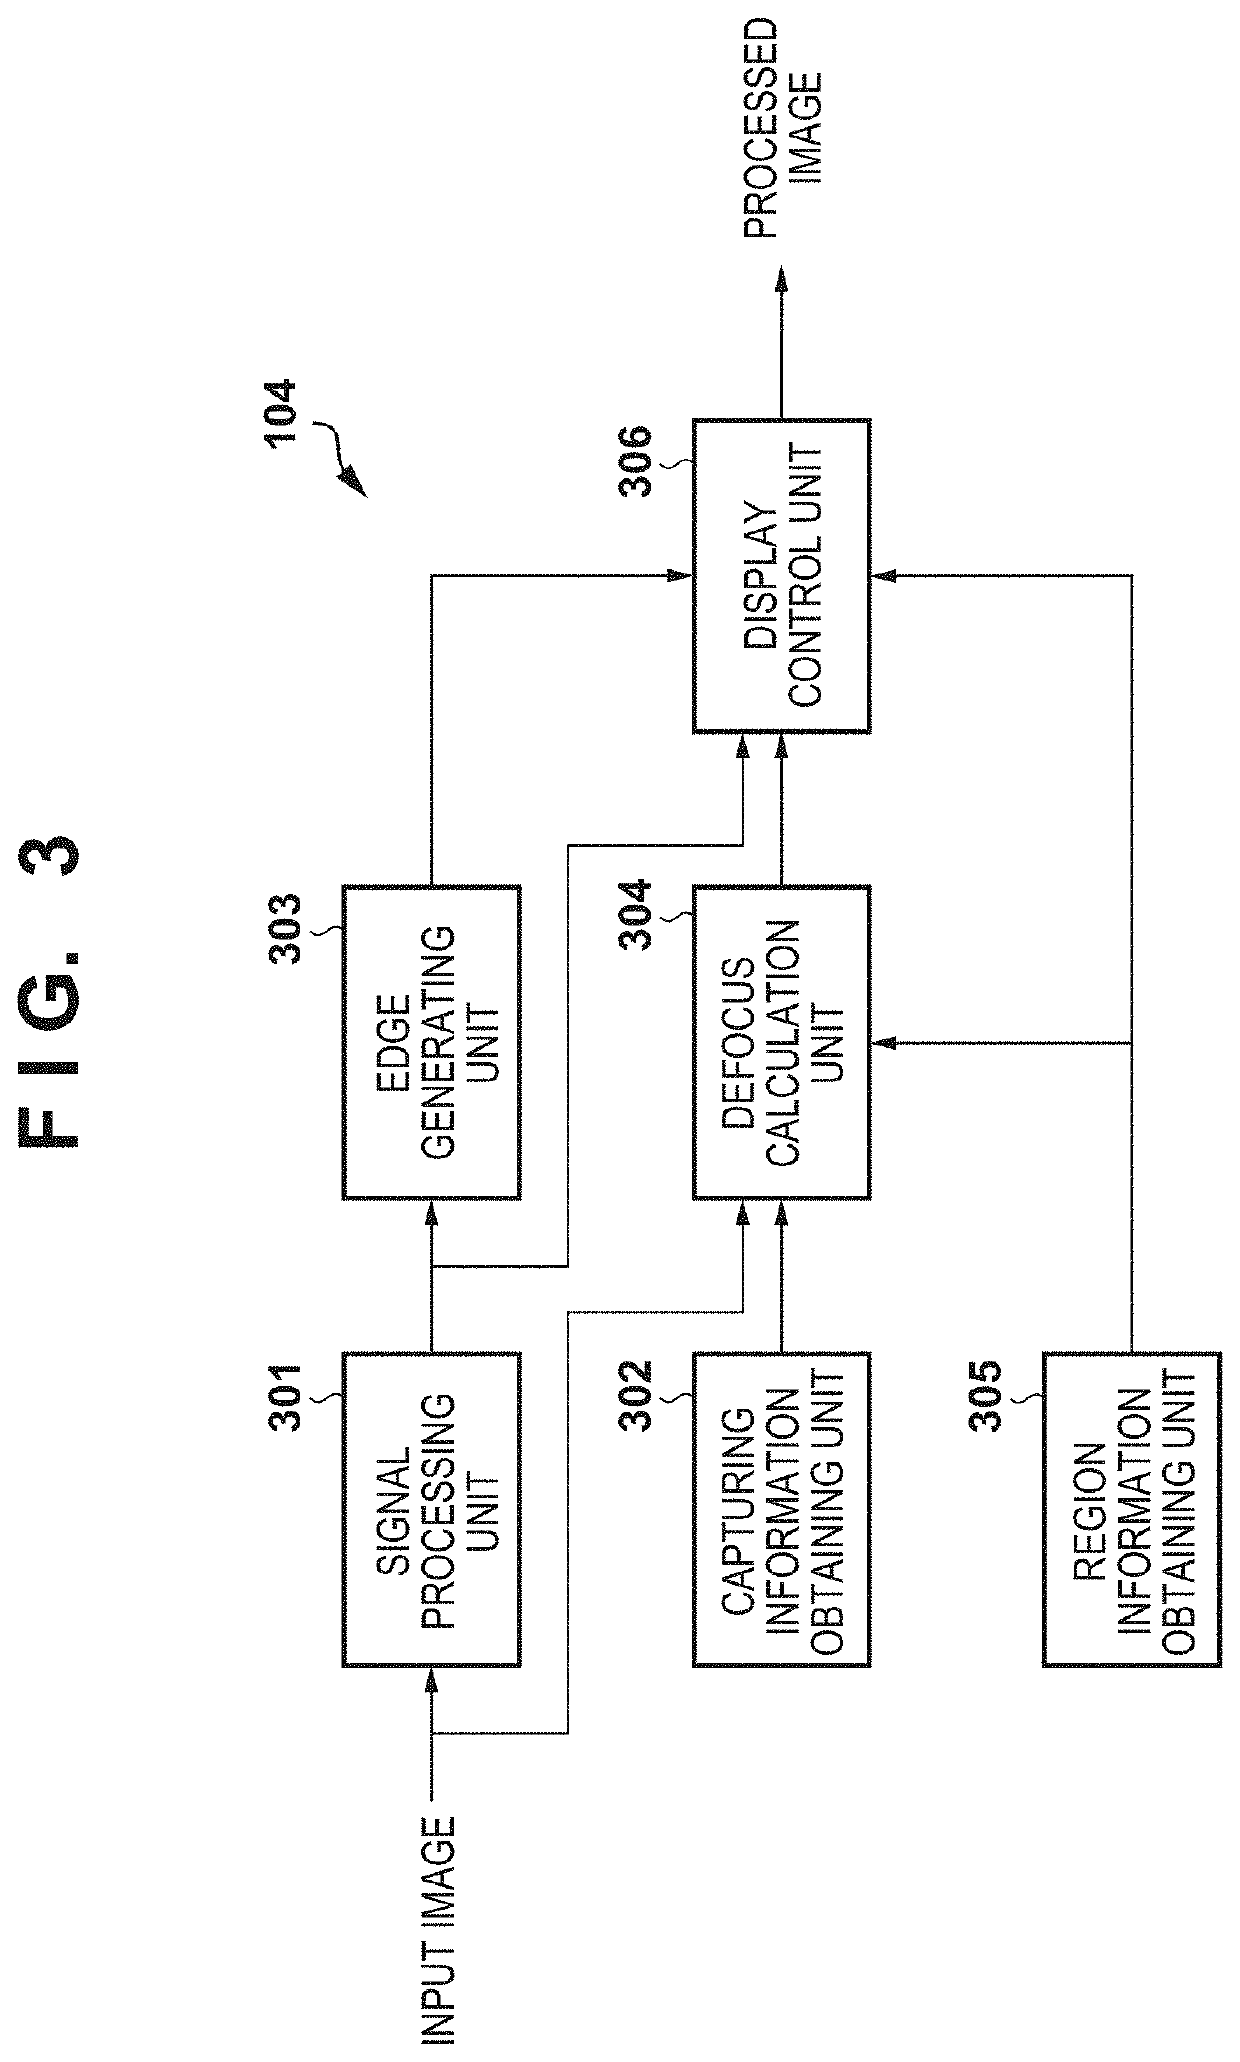 Image processing apparatus for providing information for focus adjustment, control method of the same, and storage medium